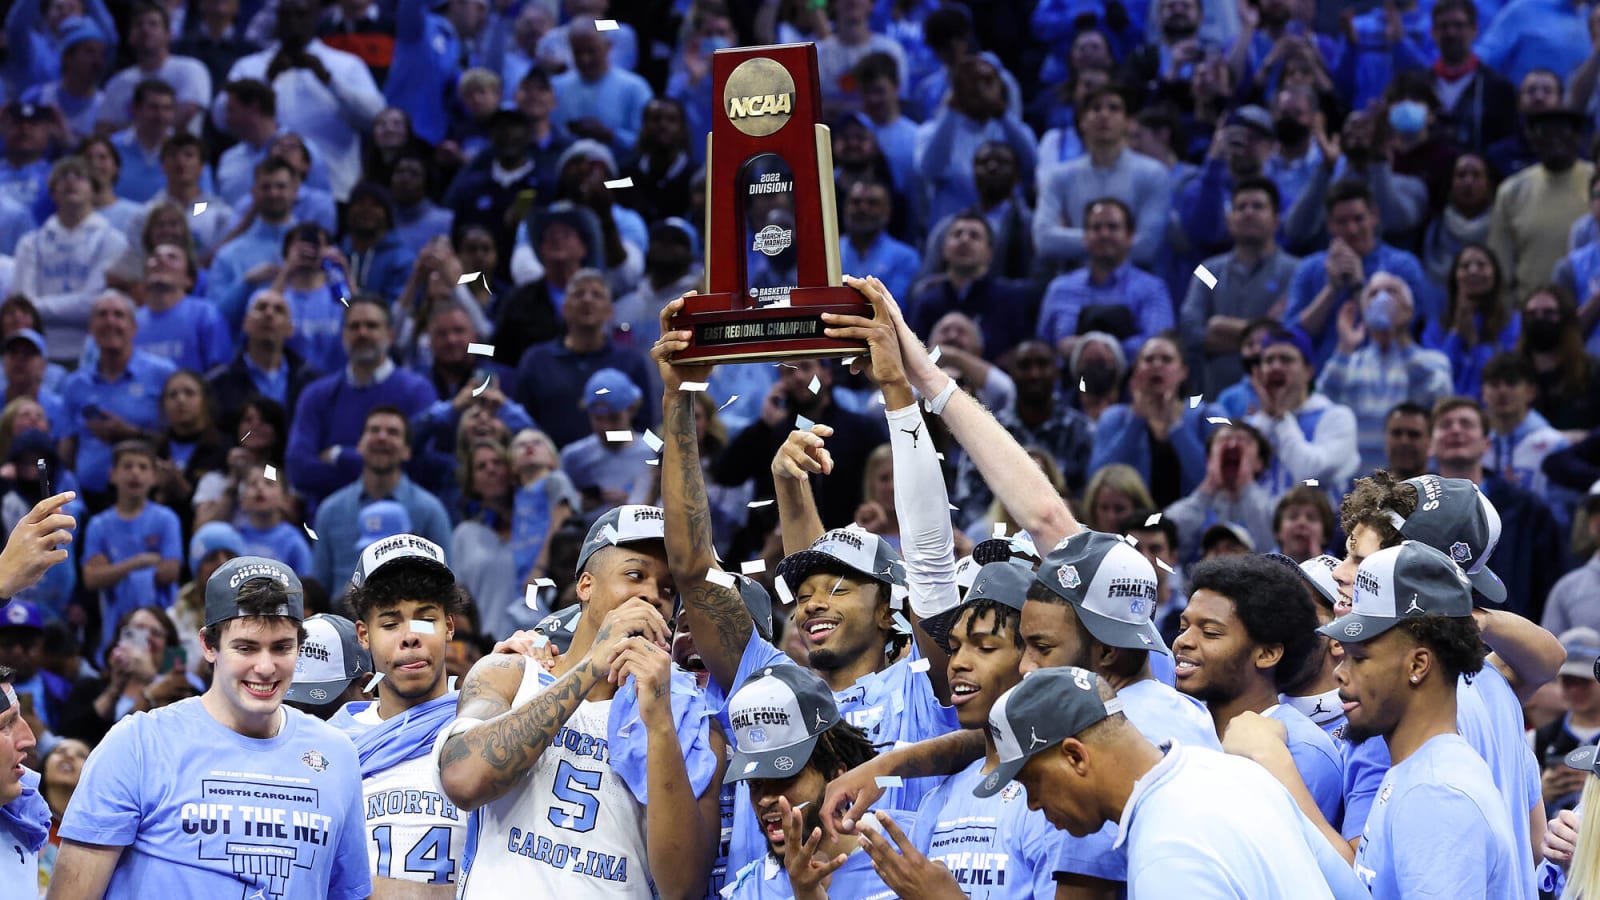 UNC ends St. Peter's run, will face Duke in Final Four